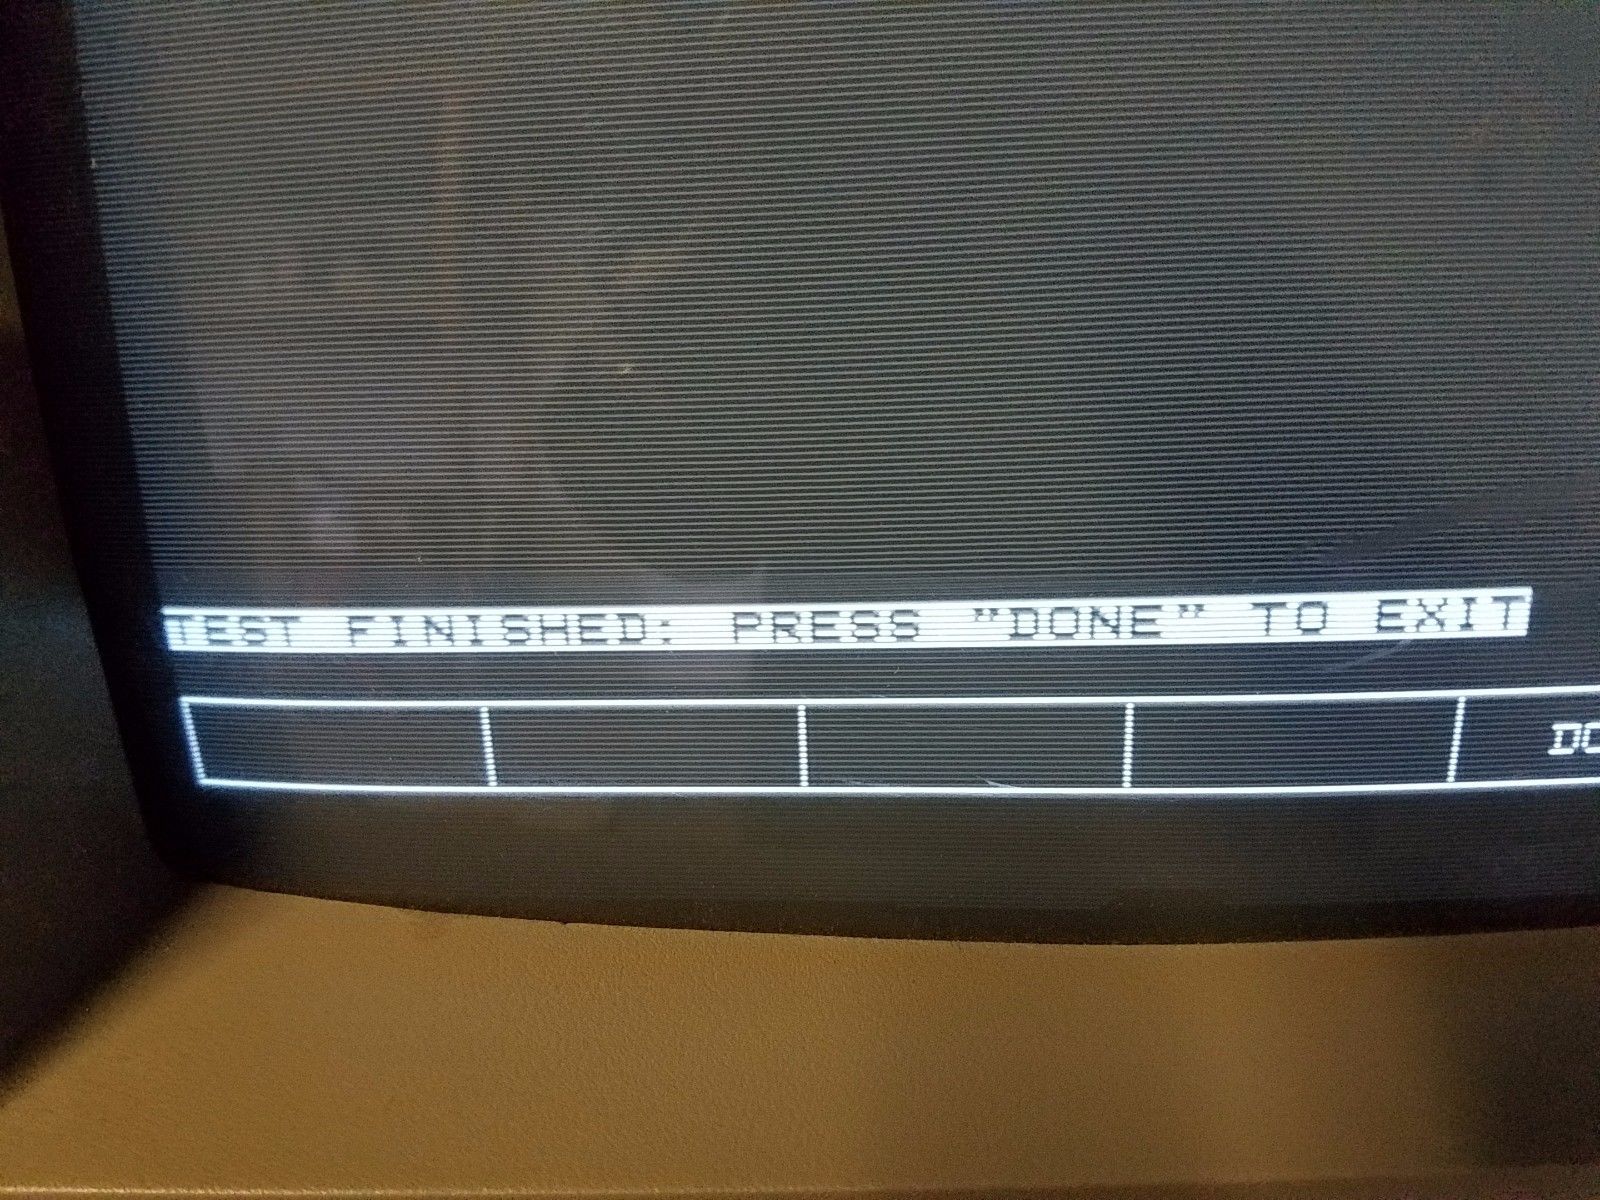 a television screen with a message on it